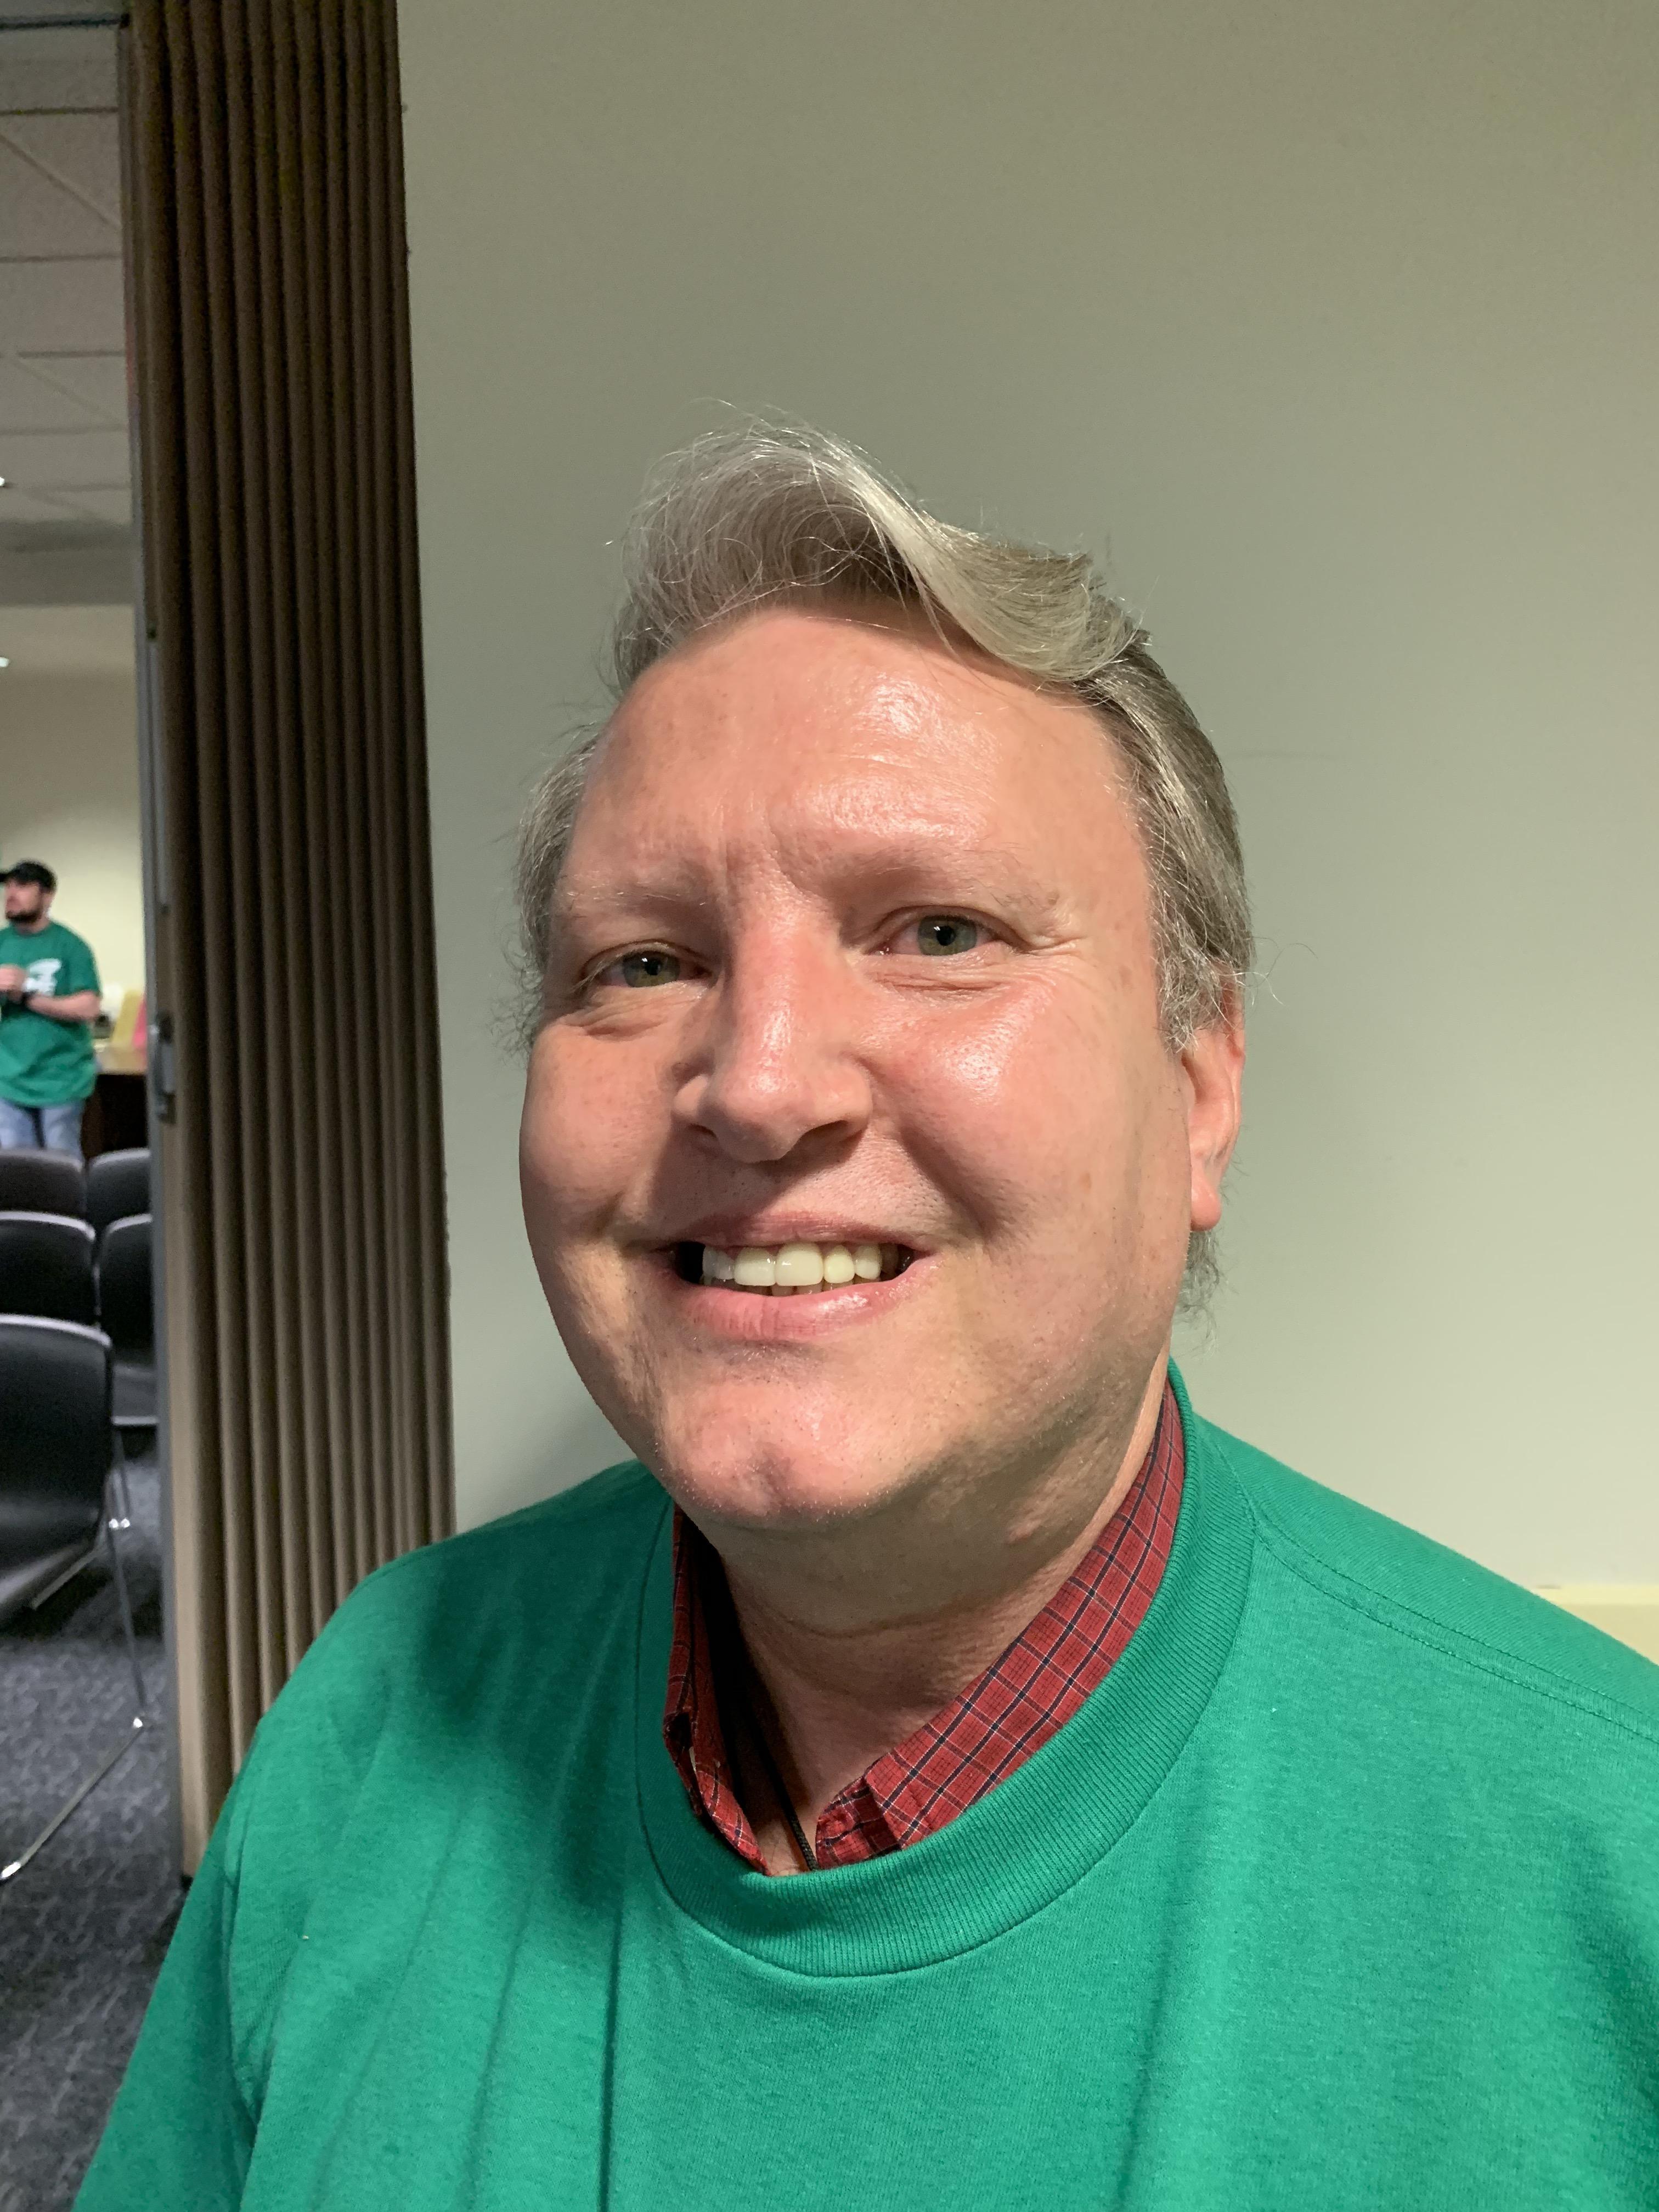 AFSCME Local 4041 member Larry Coffey at a hearing for SB135 in support of collective bargaining rights for state employees